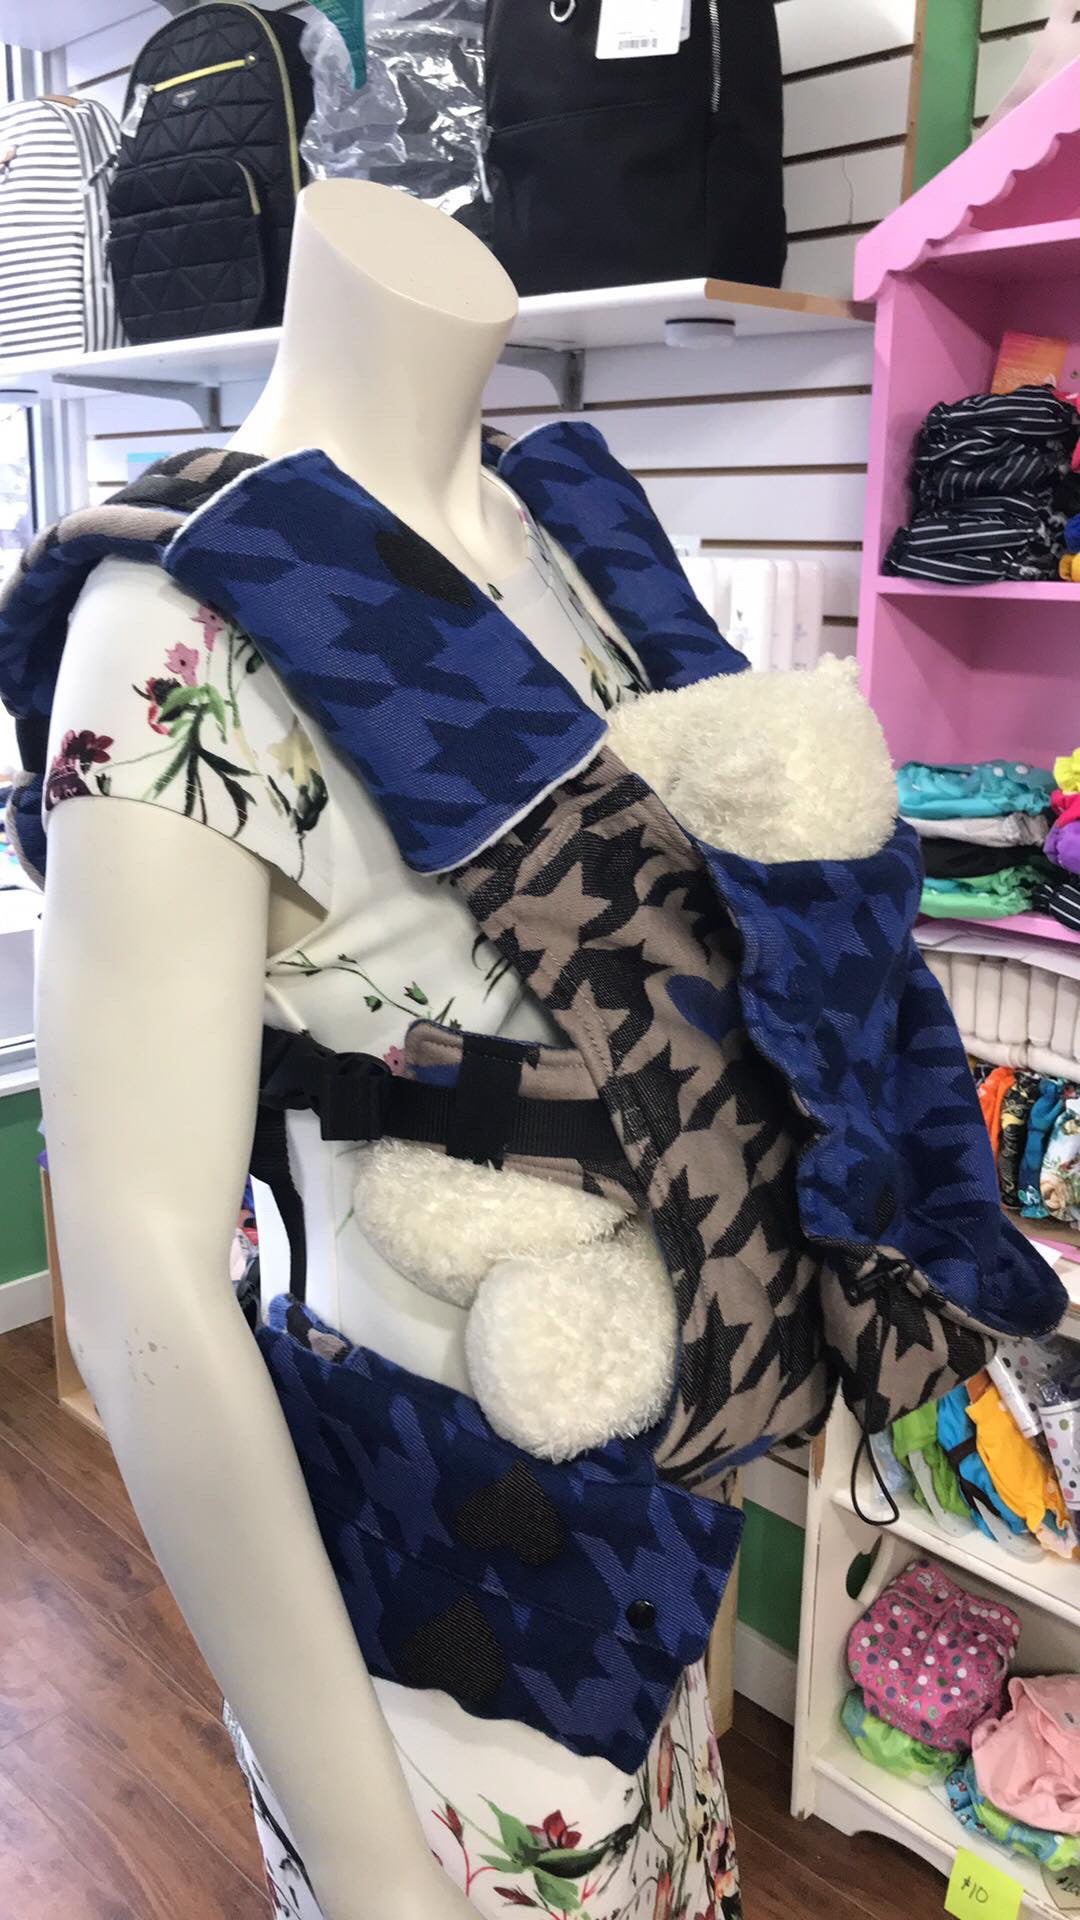 Lenny lamb ergonomic baby carrier (gently used category)